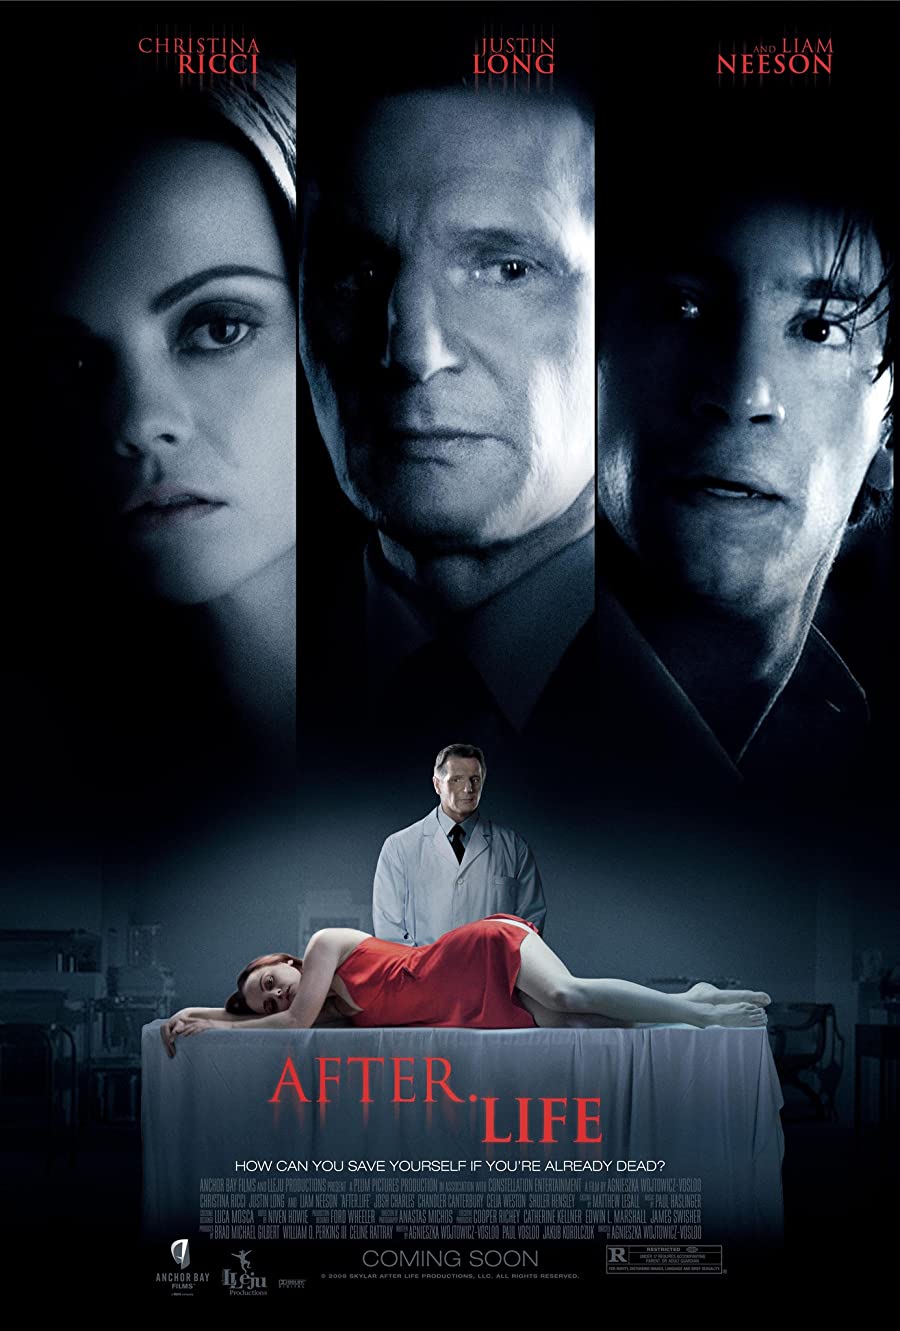 After.Life Streaming in UK 2009 Movie